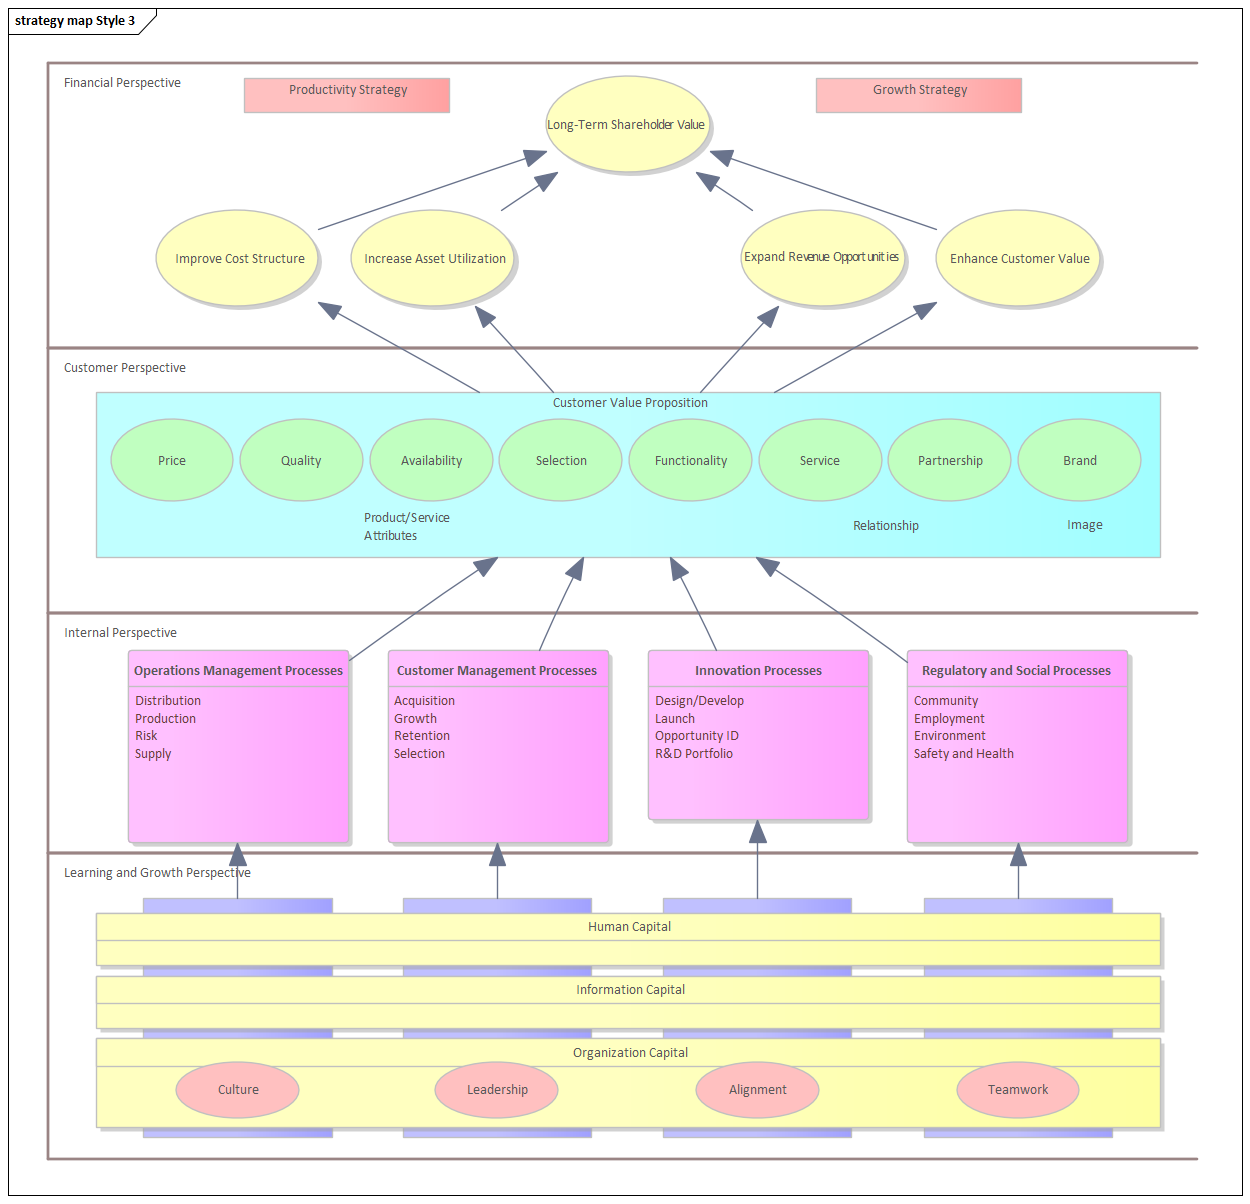 Business Strategy Map diagram (Style 3) in Sparx Systems Enterprise Architect